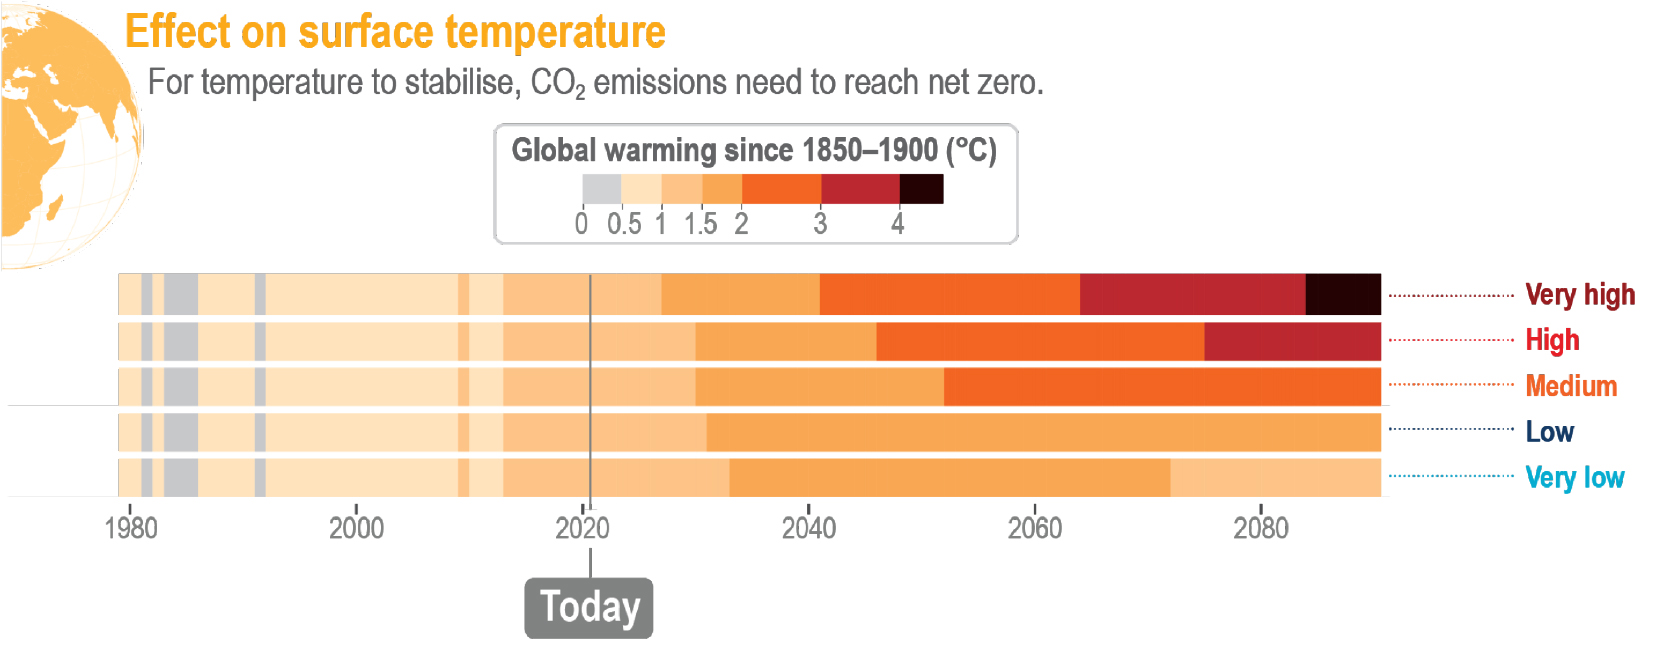 Graphic from latest IPCC report on effects of CO2 on surface temperature.